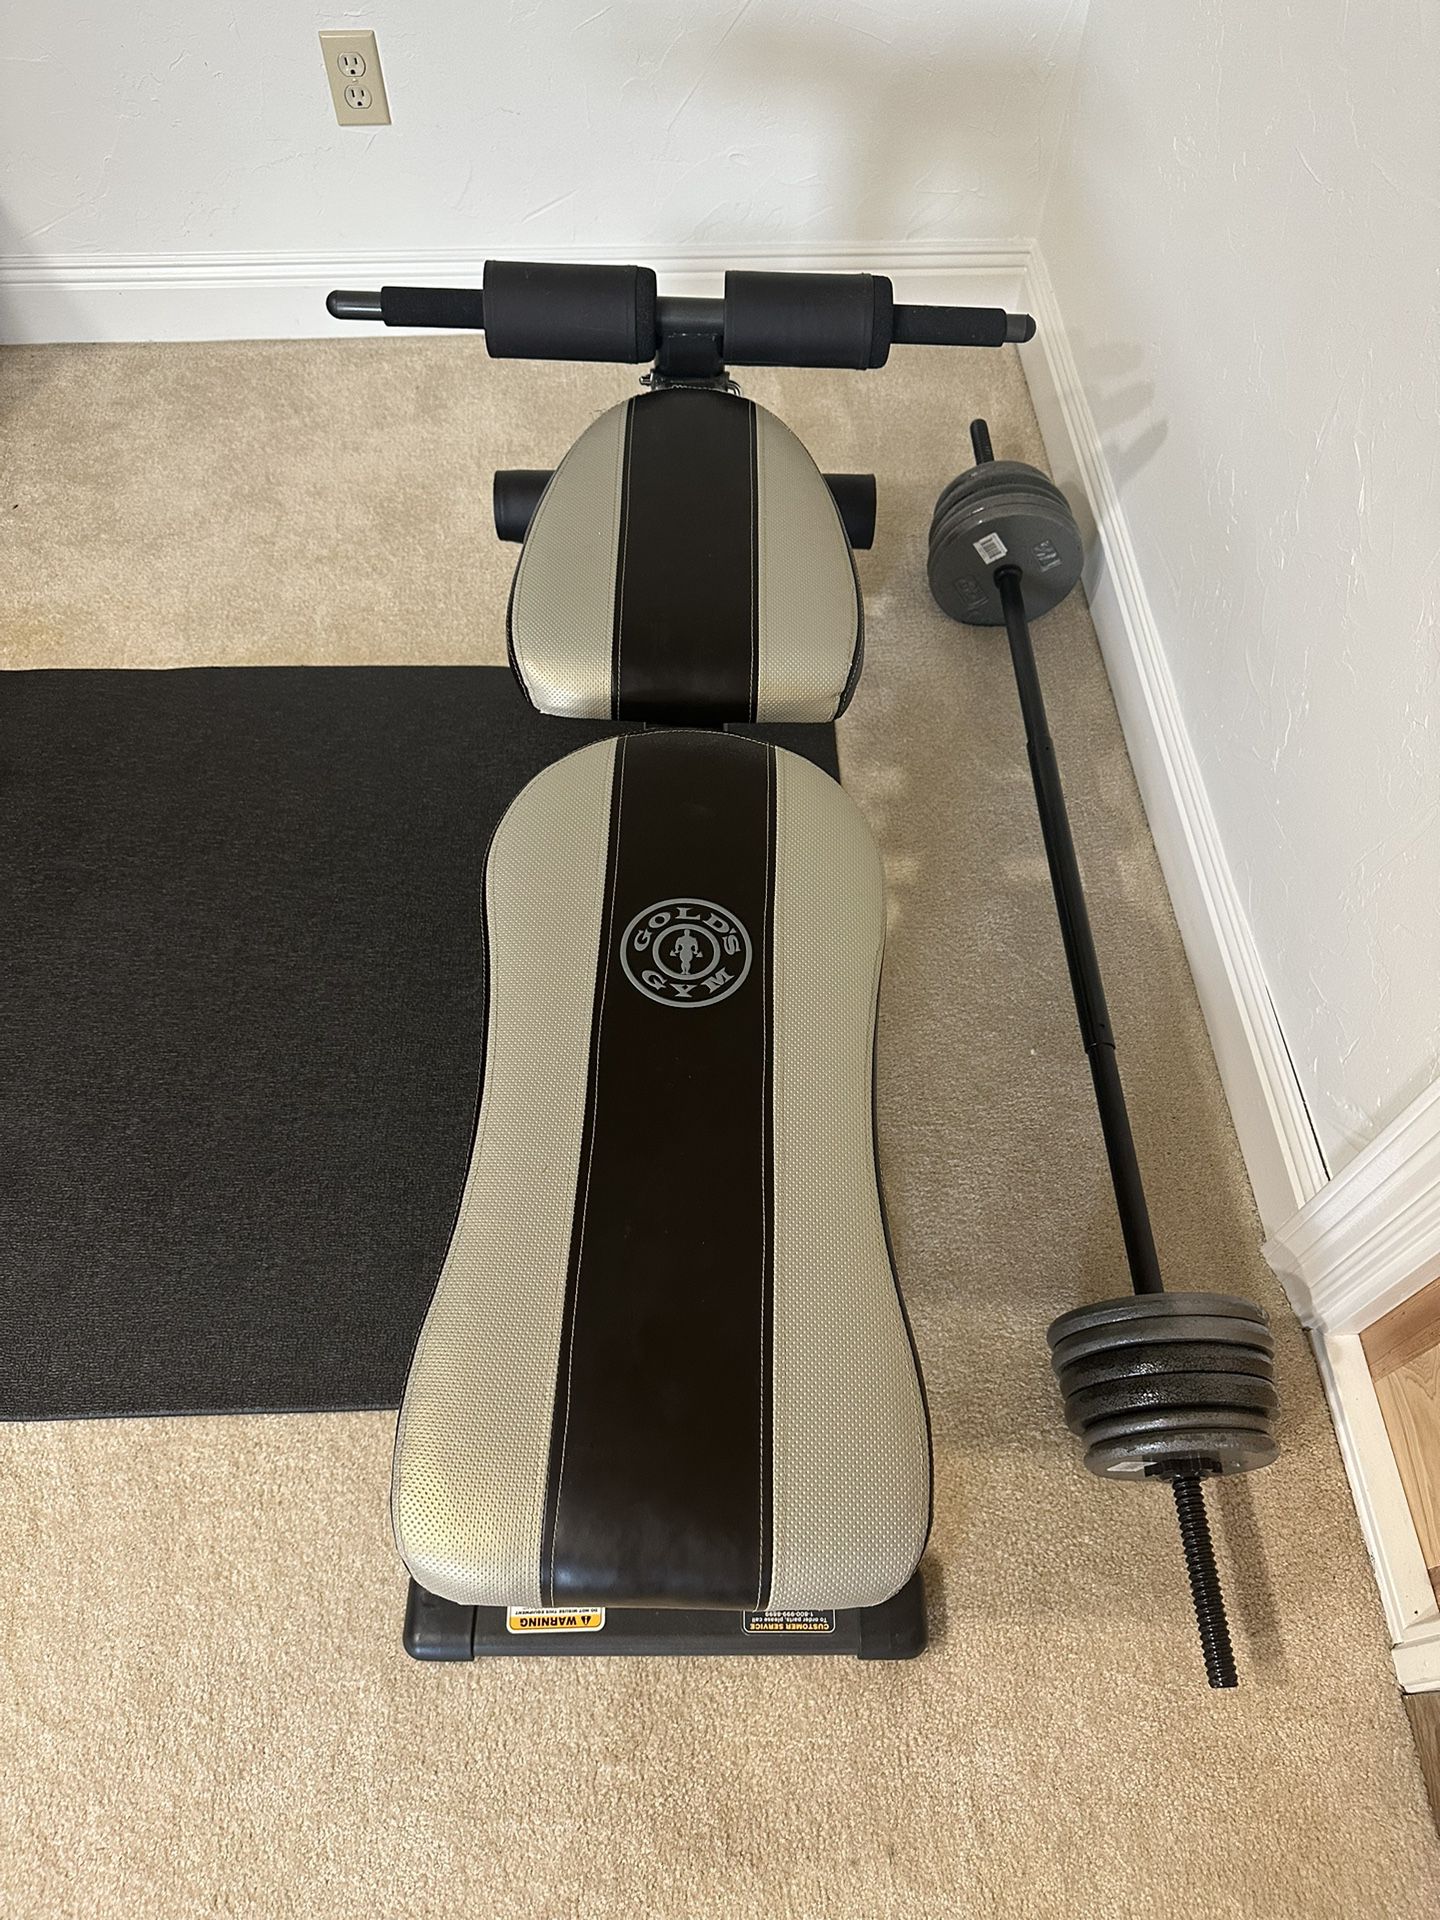 Gold’s Gym Utility Bench Adjustable Excellent Condition $65